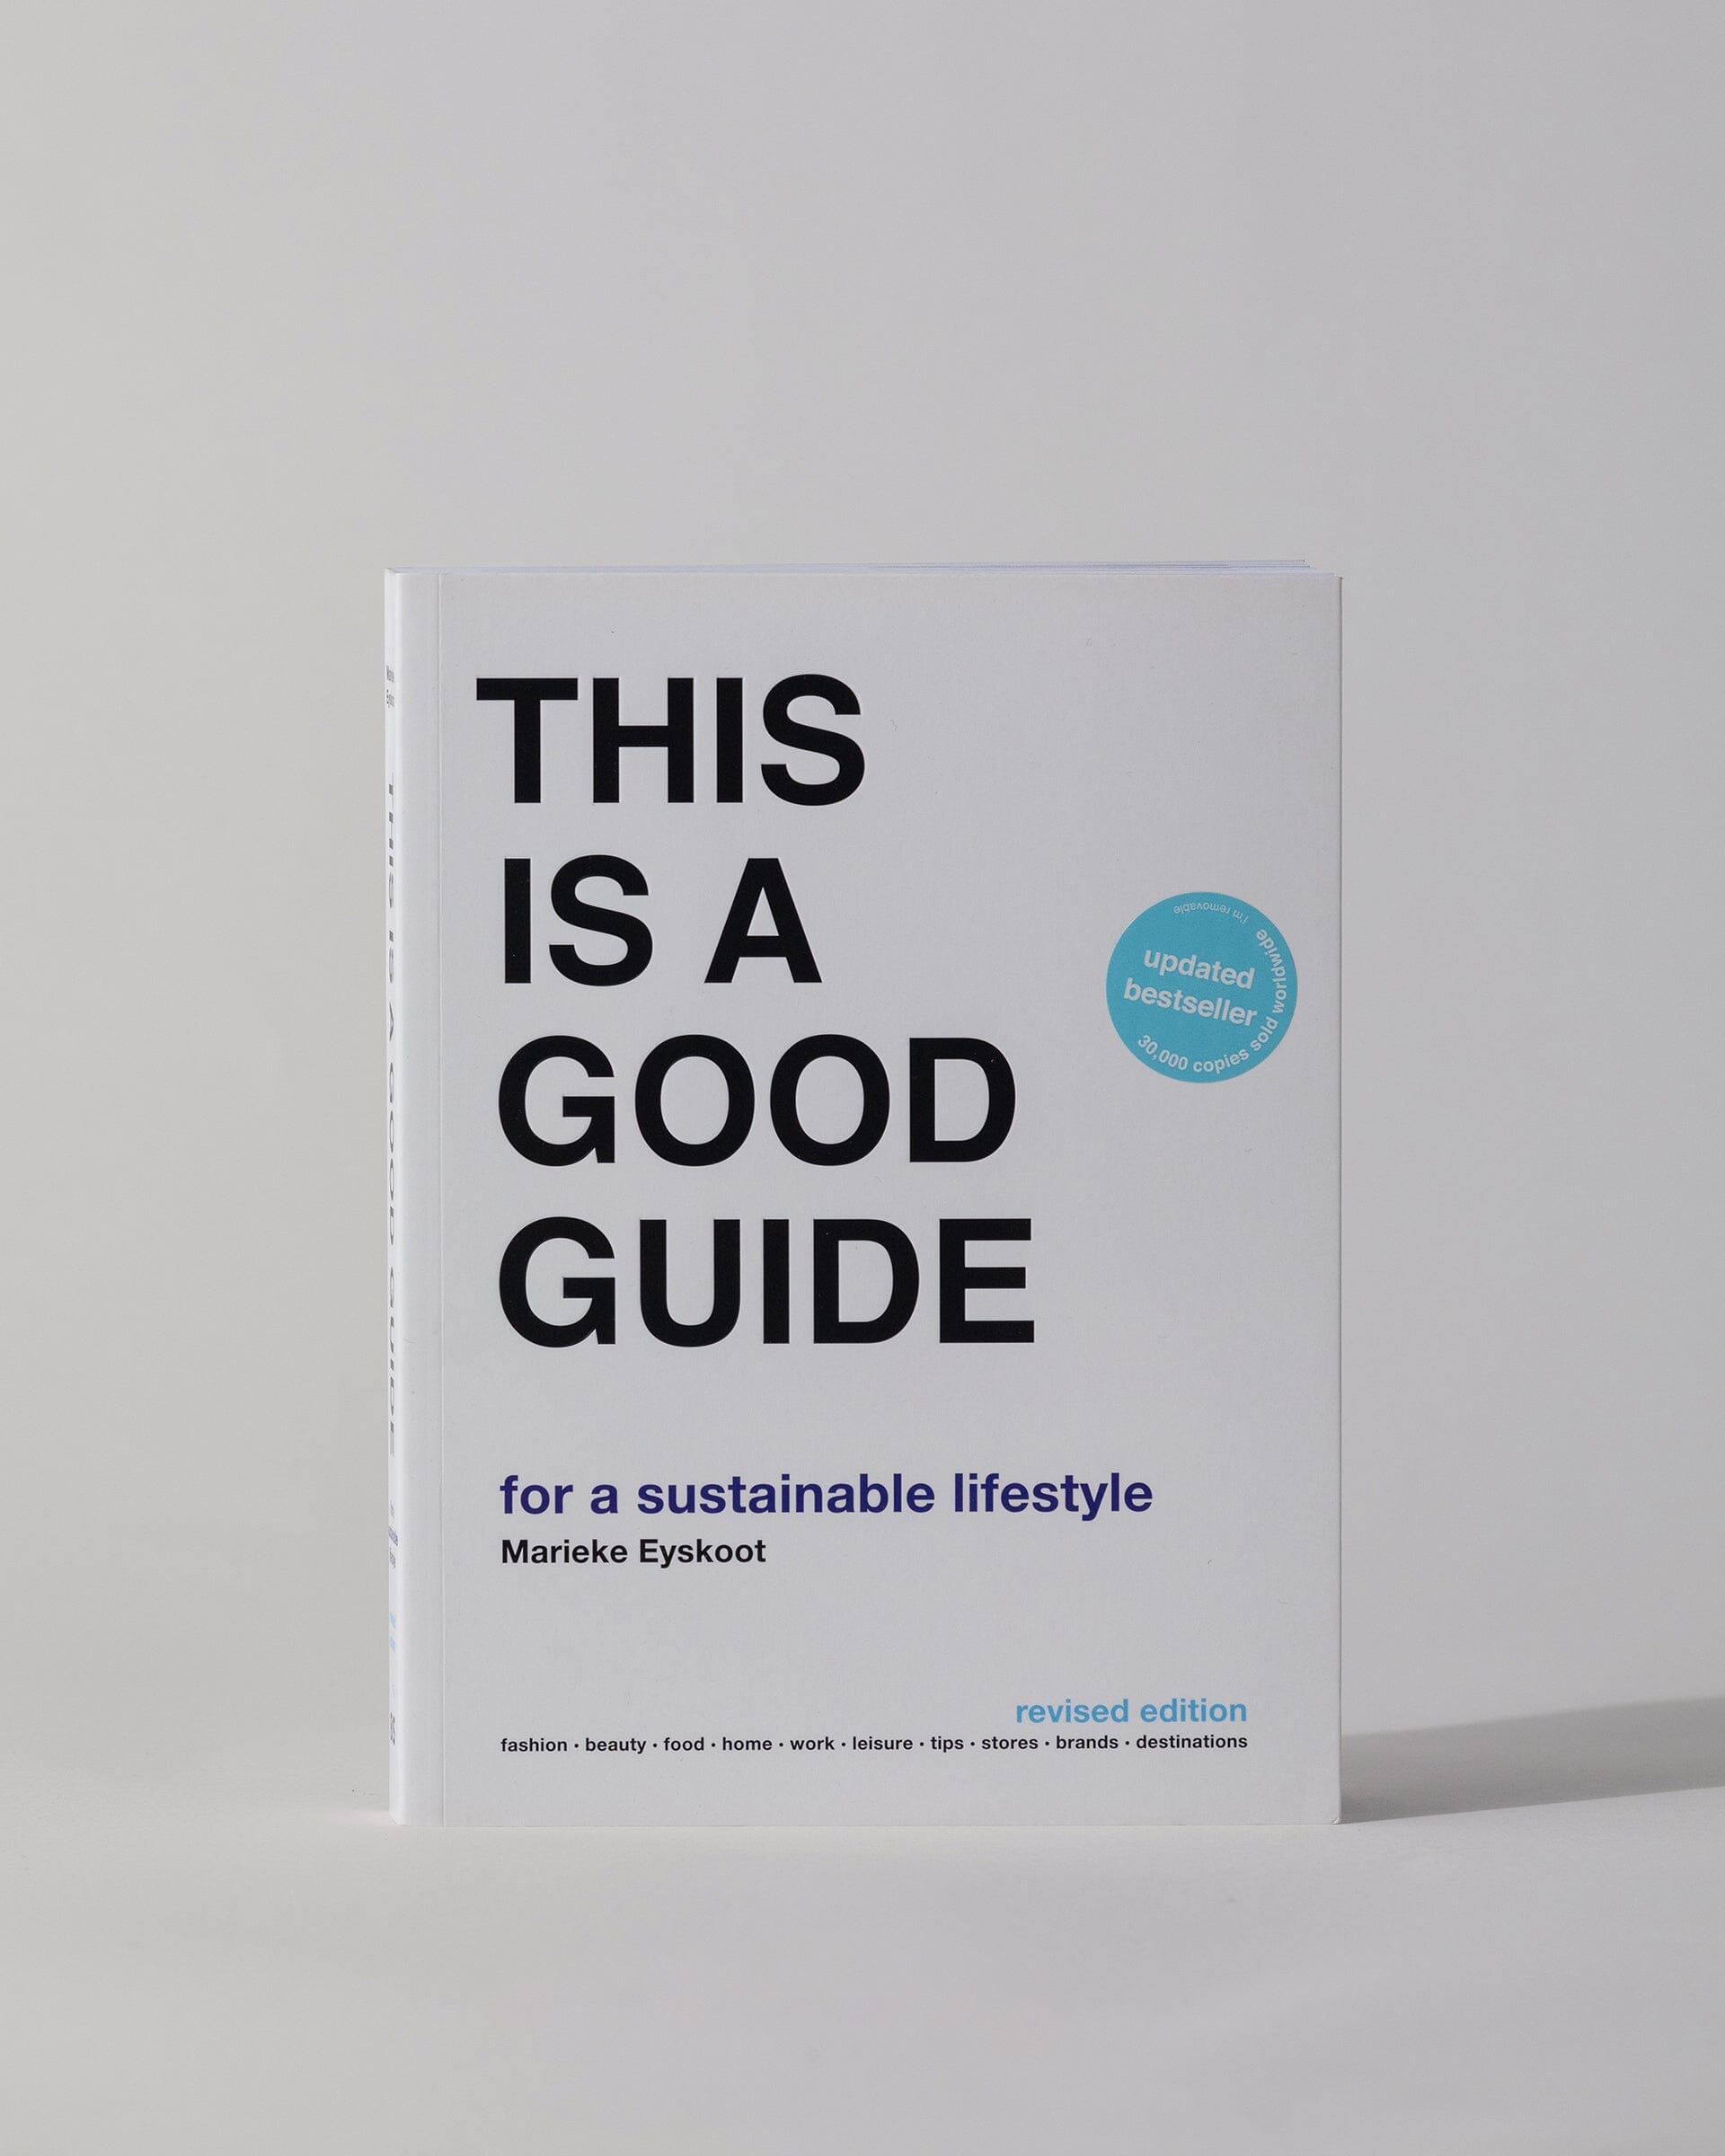 This is a Good Guide - for a Sustainable Lifestyle